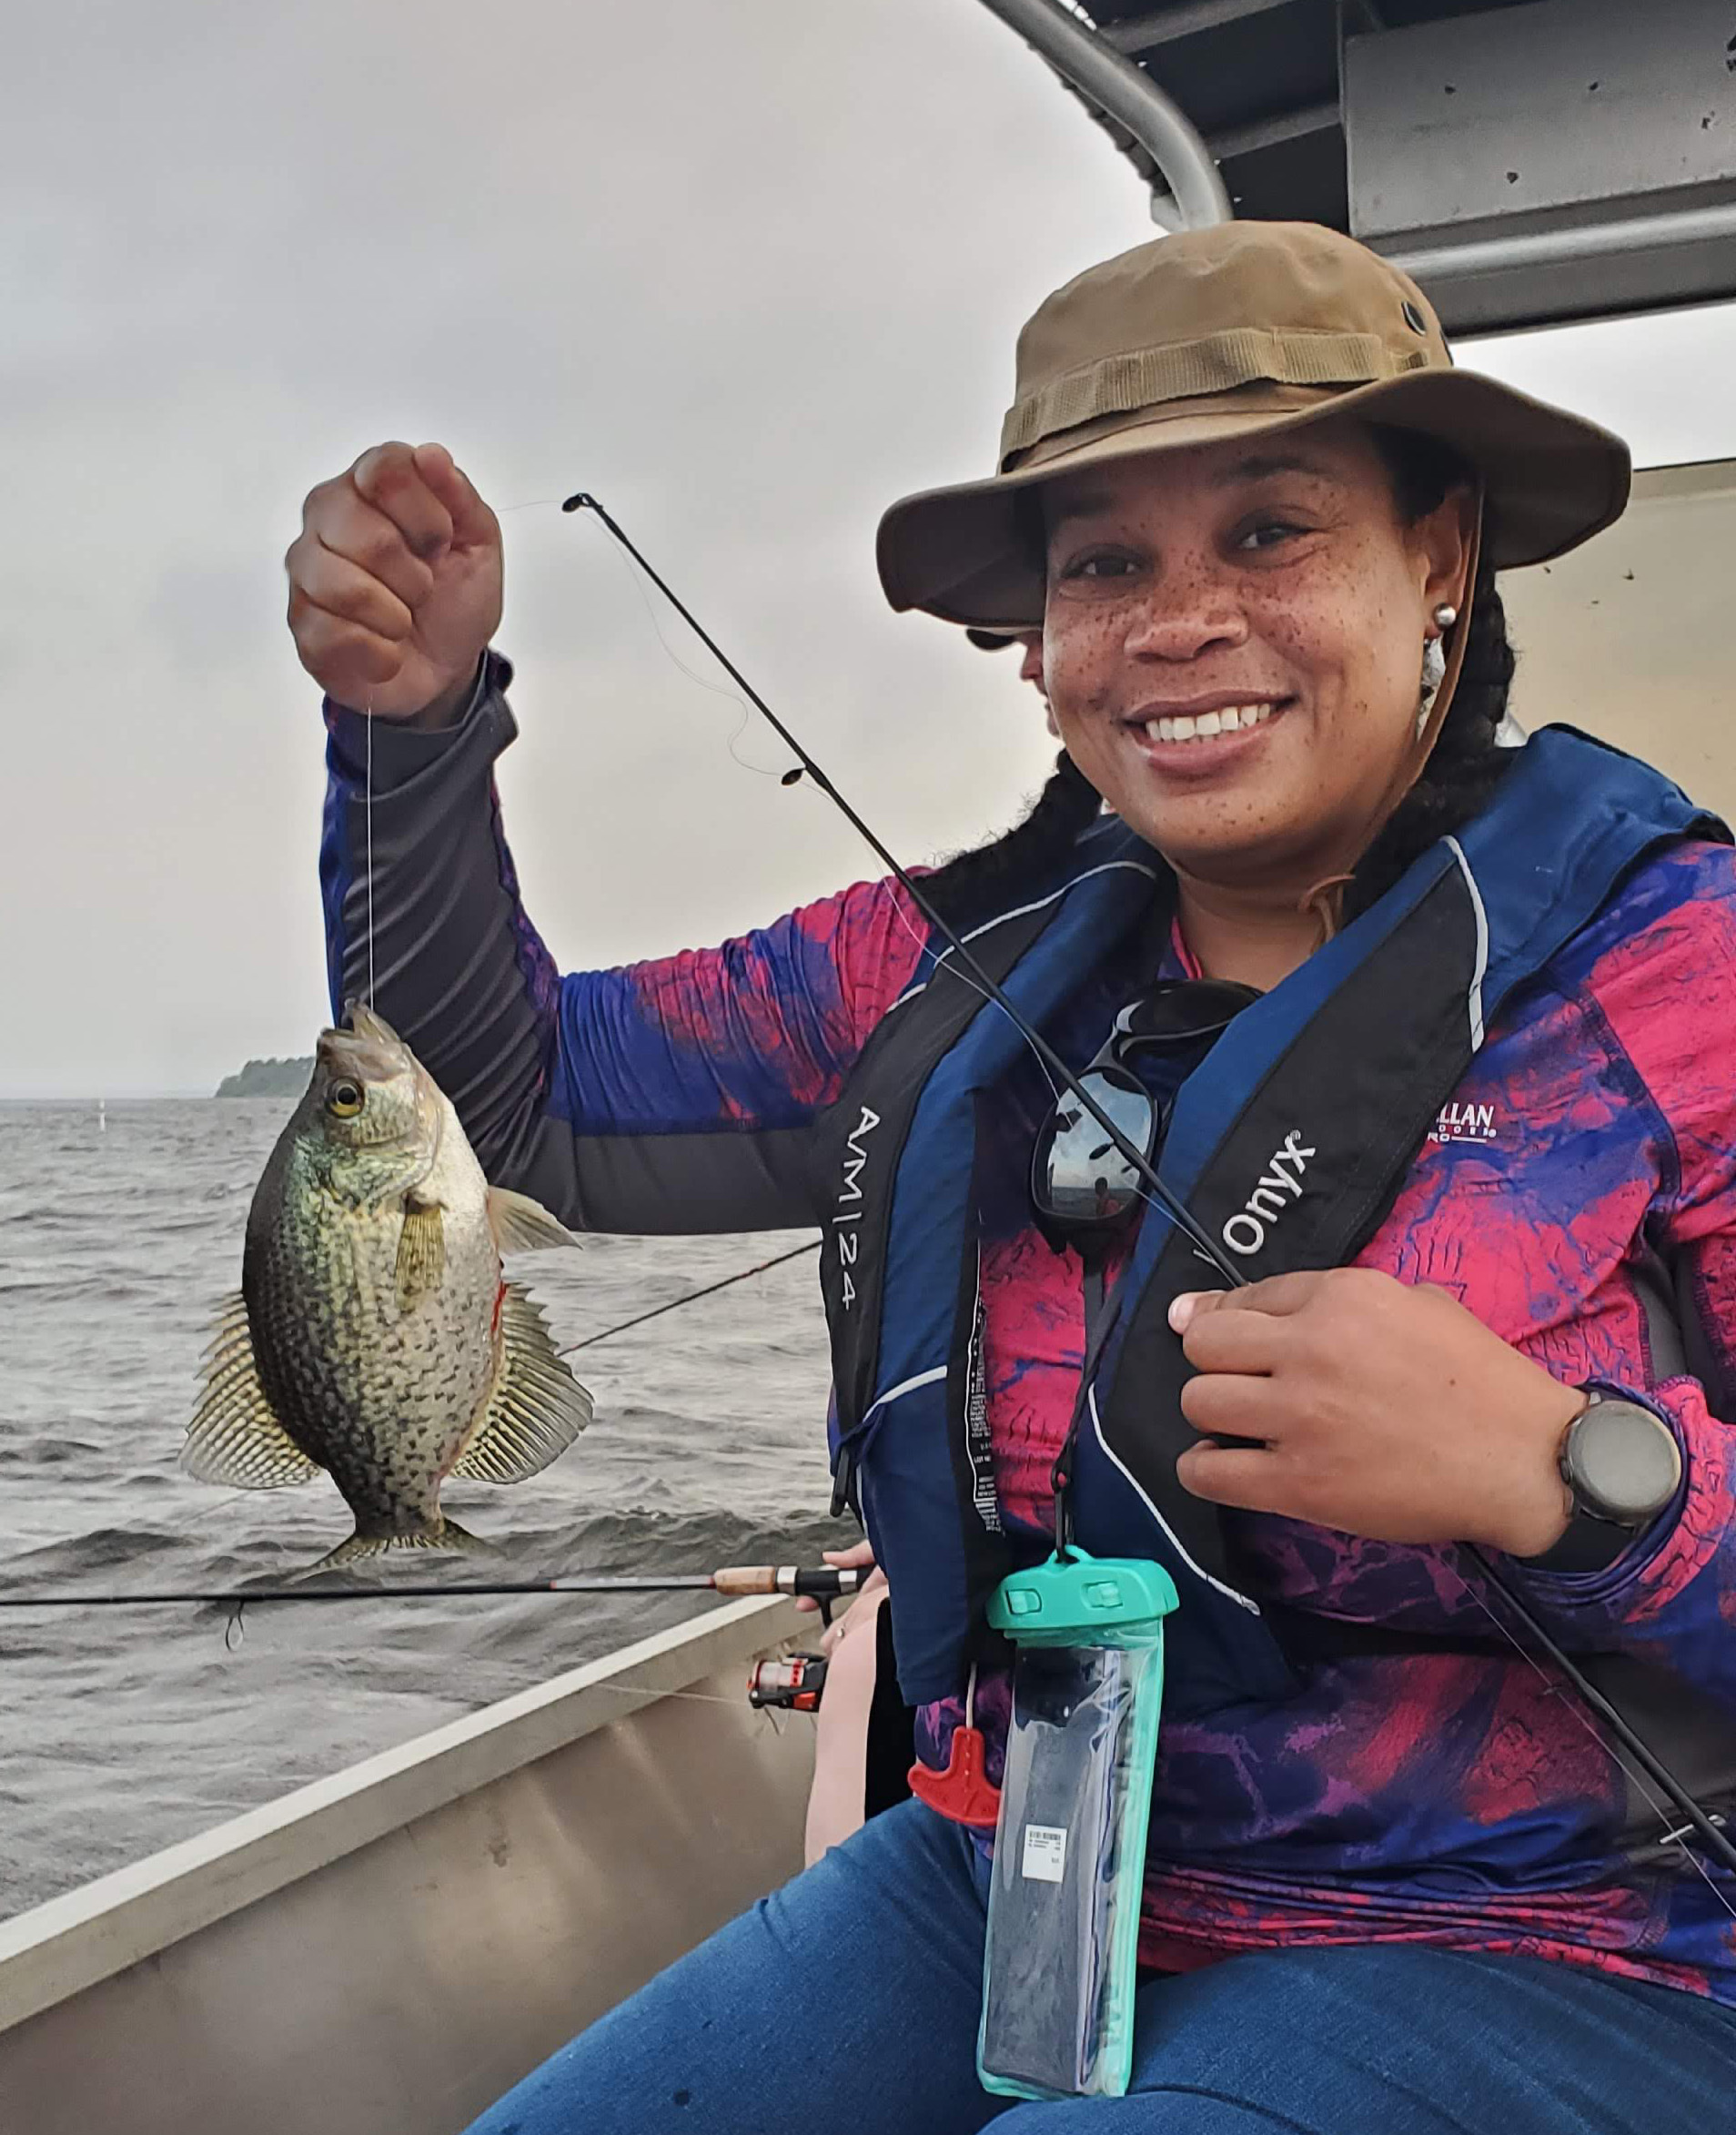 Two Weekend Workshops Packed with Fishing, Kayaking, and More for Women  Participants